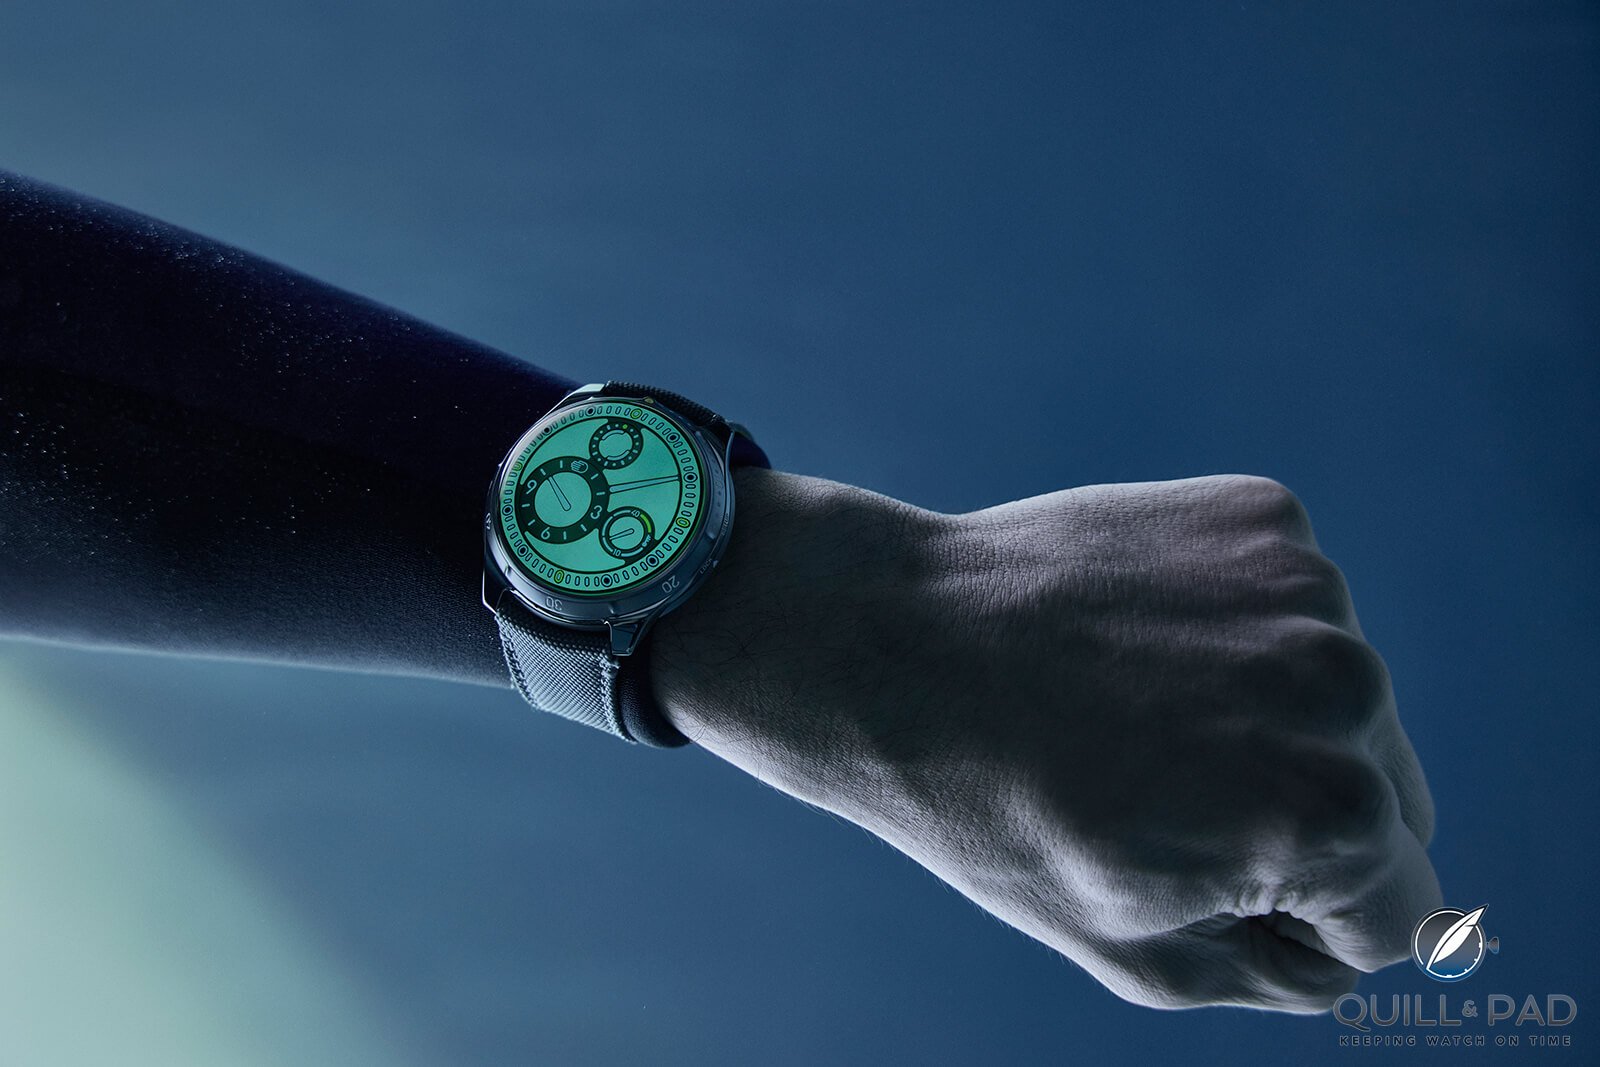 New release: Ressence Type 5 L – A Great Dive Watch gets Even Better with More Lume